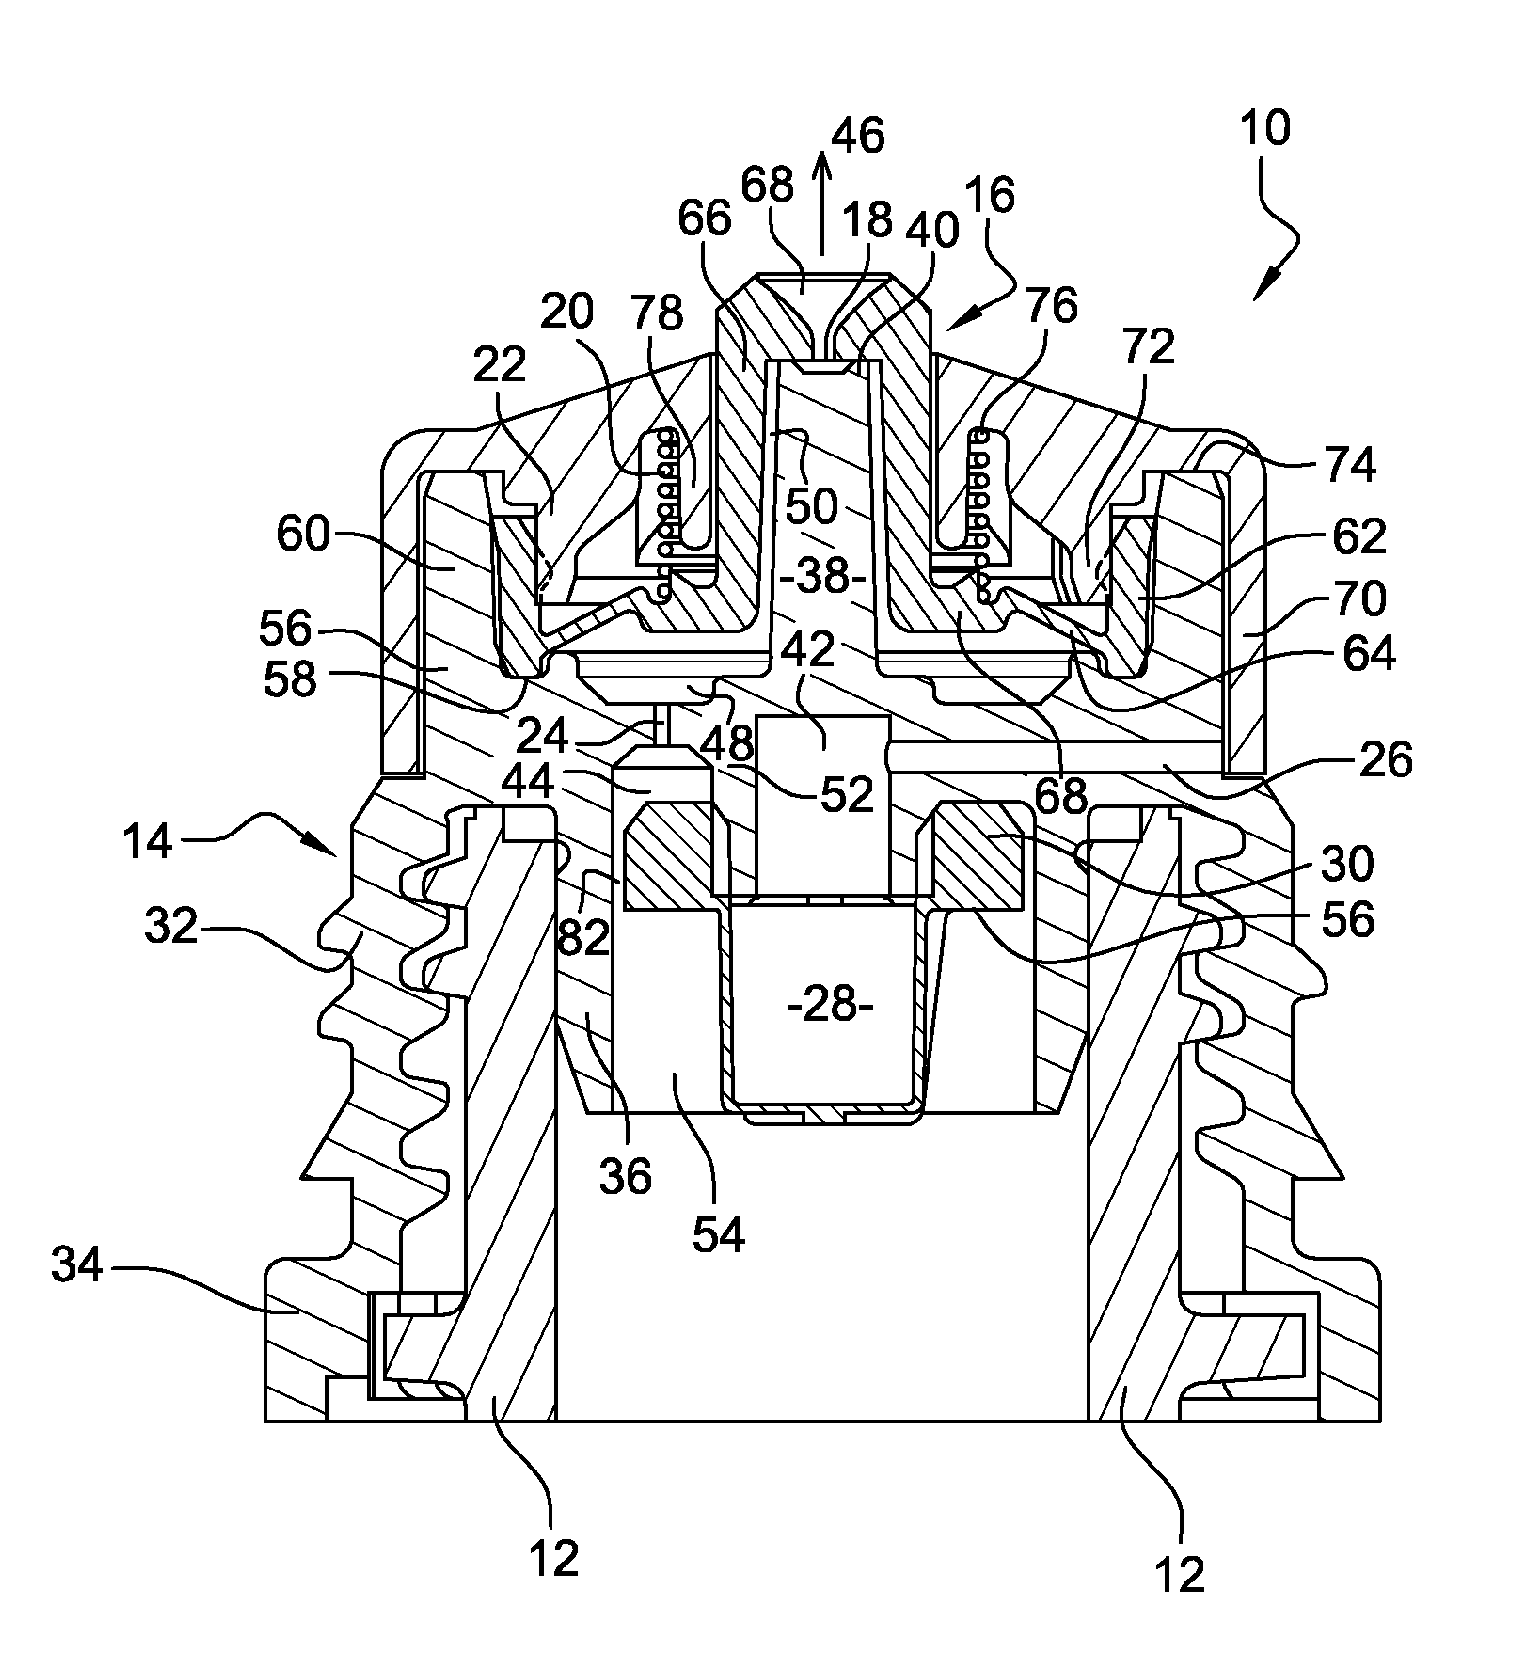 Device for dispensing liquid in the form of drops